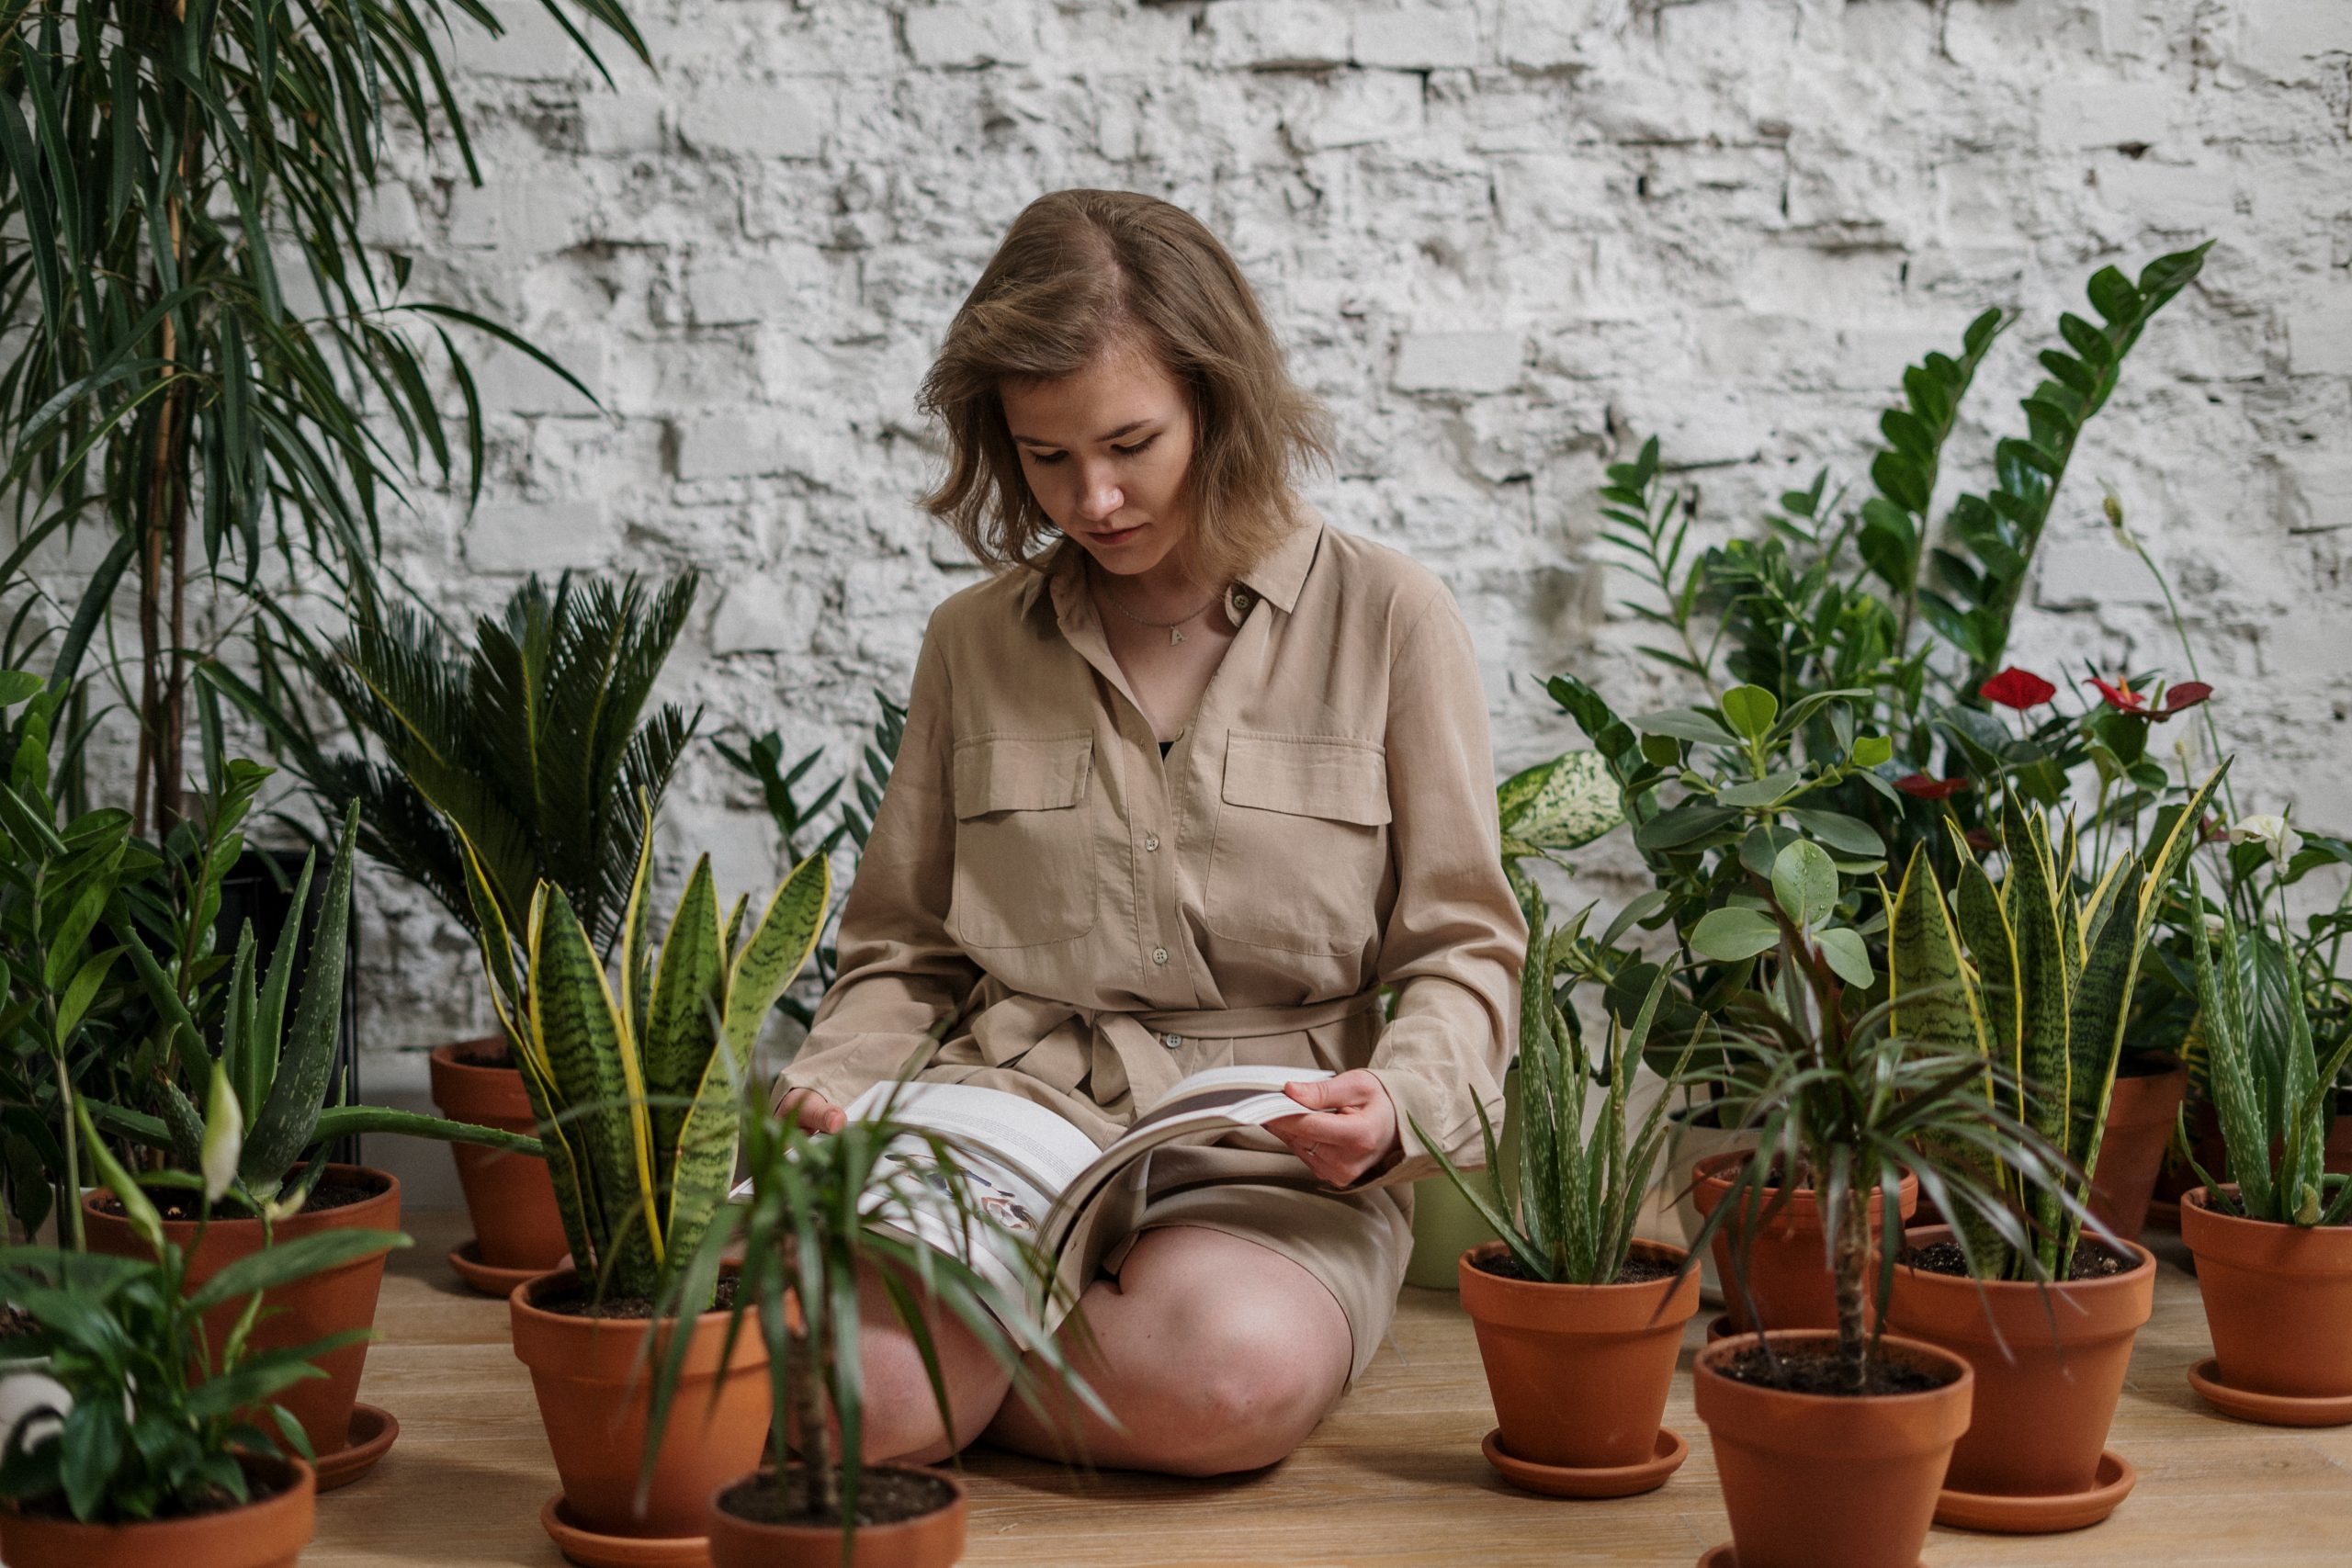 Woman reading book near potted plants